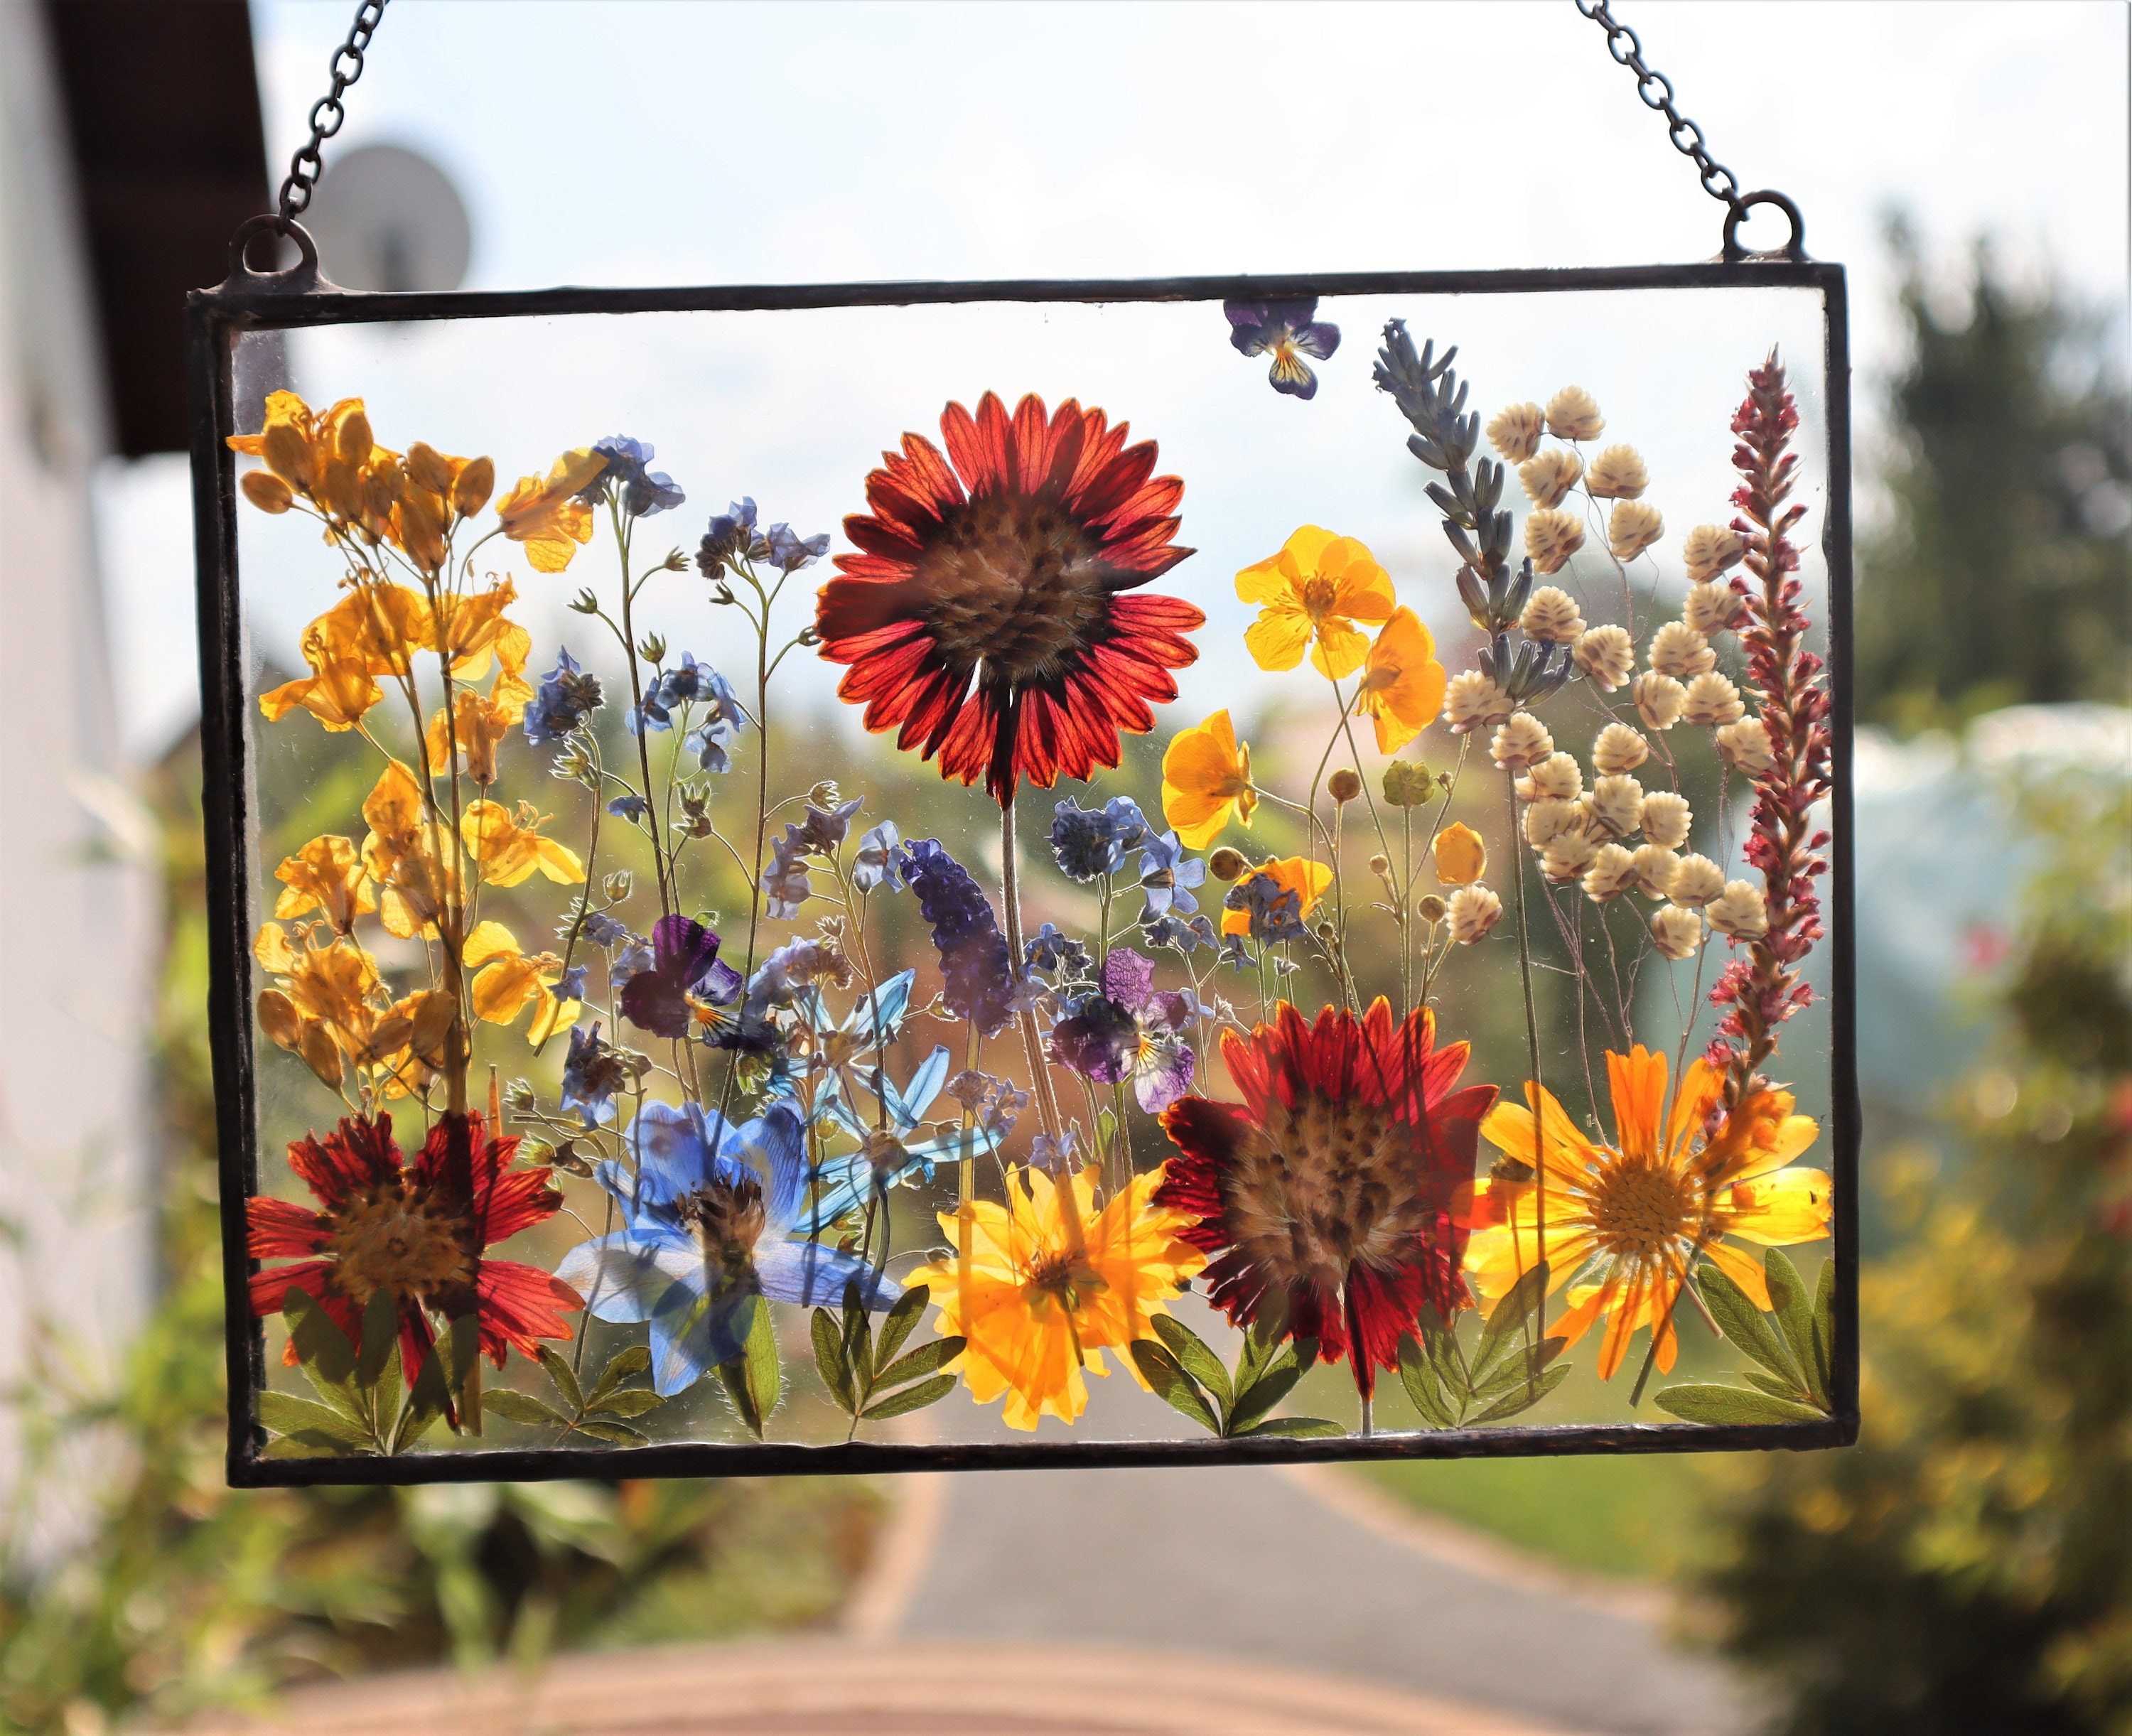 Pressed Flower Frame Stained Glass Decor Dried Flower Art in Floating Frame  Real Flowers Arched Herbarium Natural Botanic Wall Hanging 